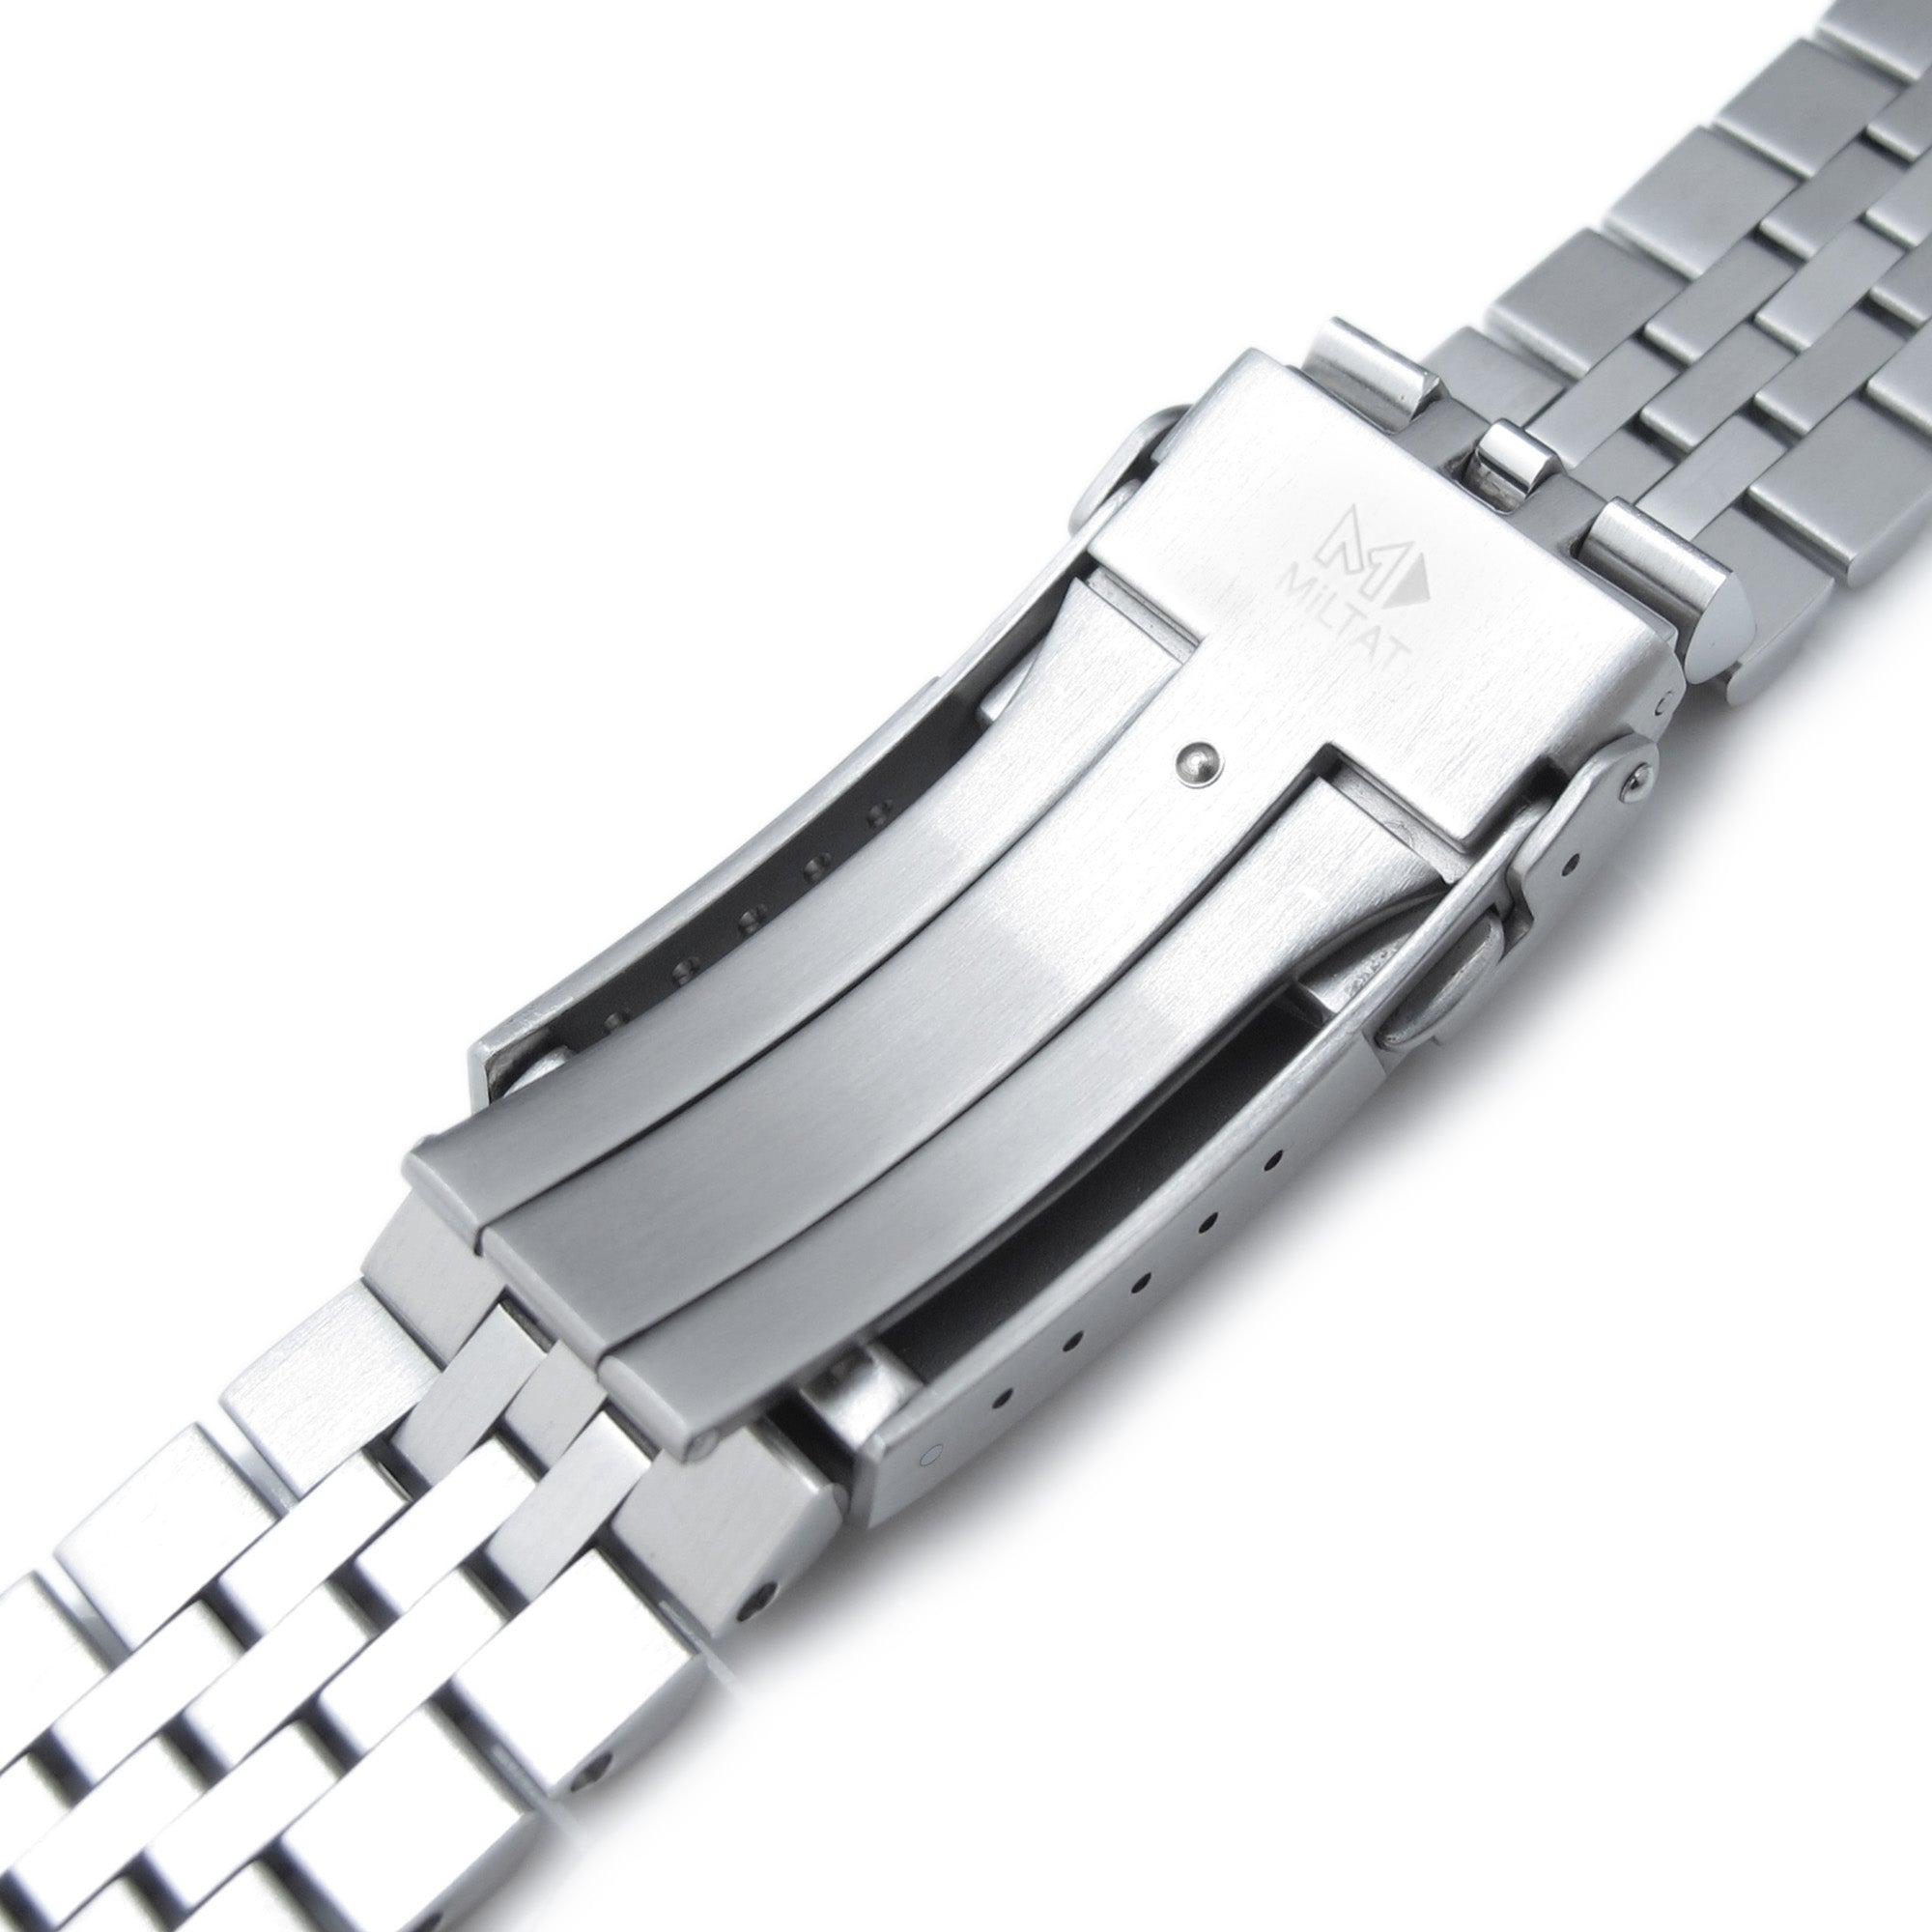 22mm Super-J Louis JUB Watch Band compatible with Seiko New Turtles SRP777 & PADI SRPA21, 316L Stainless Steel V-Clasp Brushed